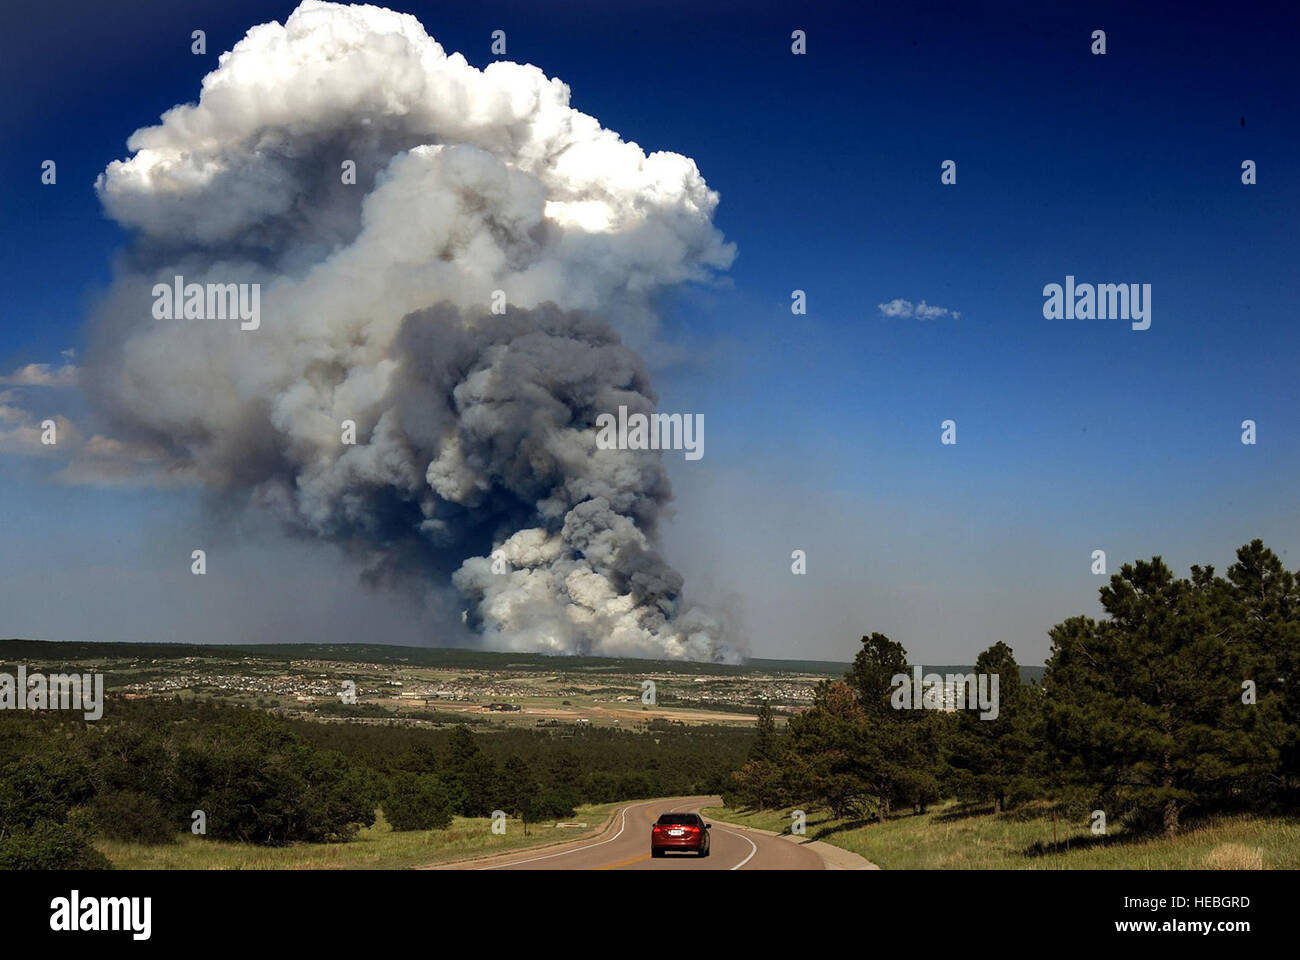 The Black Forest Fire smolders several miles east of the U.S. Air Force Academy in this shot taken near the Cadet Chapel June 11, 2013, in Colorado Springs, Colo. The fire burned between 7,500 and 8,000 acres the first day approximately 100 homes. More than 5,000 people were evacuated from an additional 1,700 homes. (U.S. Air Force photo/Carol Lawrence) Stock Photo